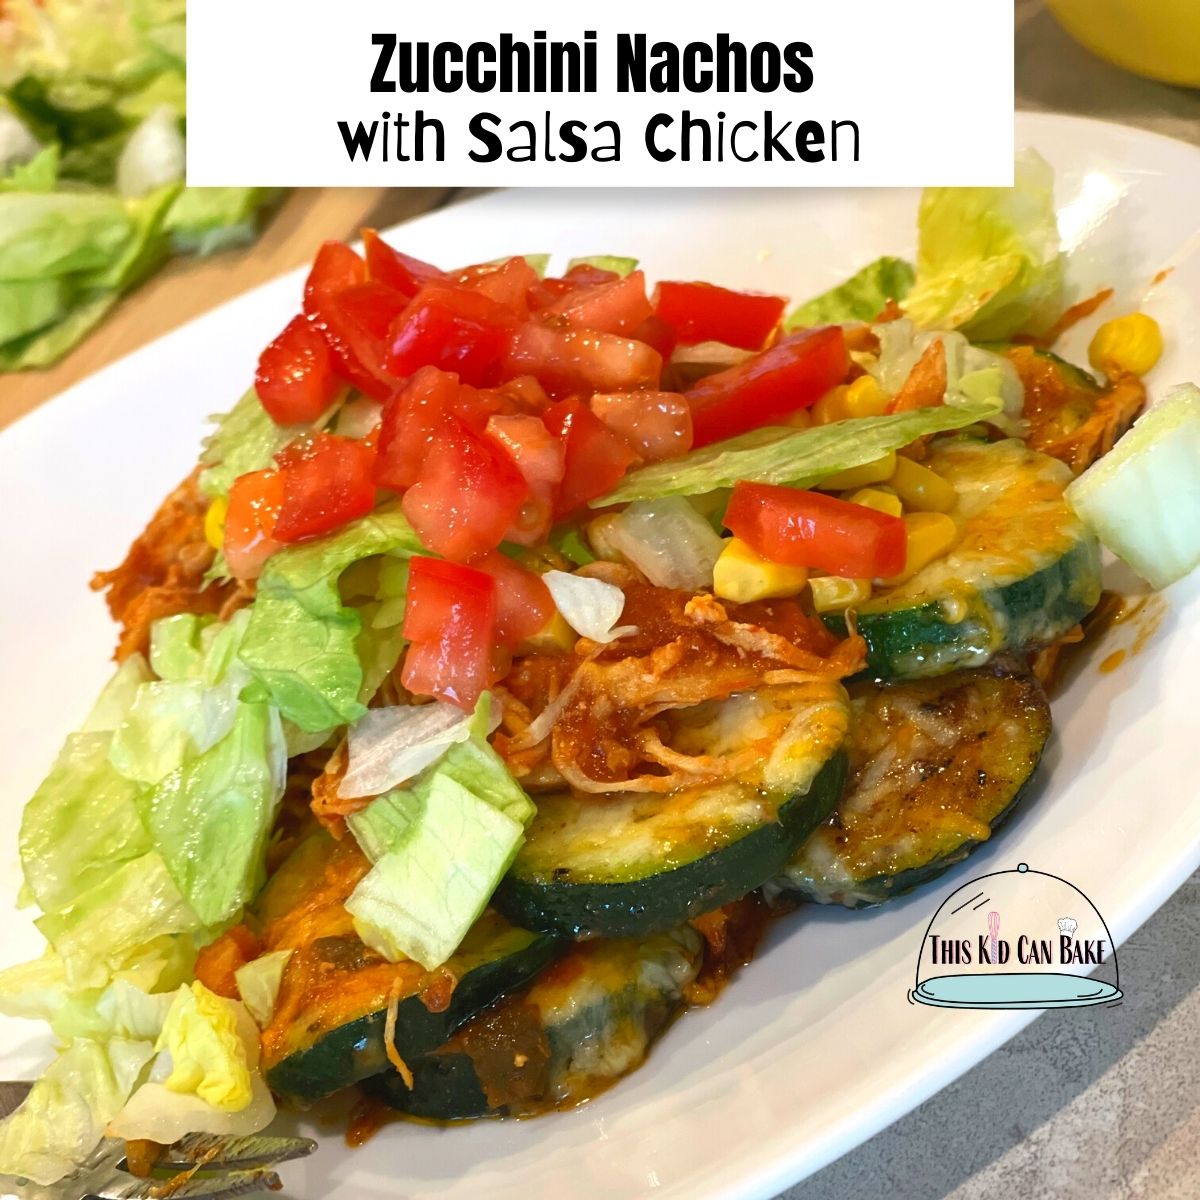 a picture of zucchini nachos topped with shredded chicken, lettuce, tomato, and corn.